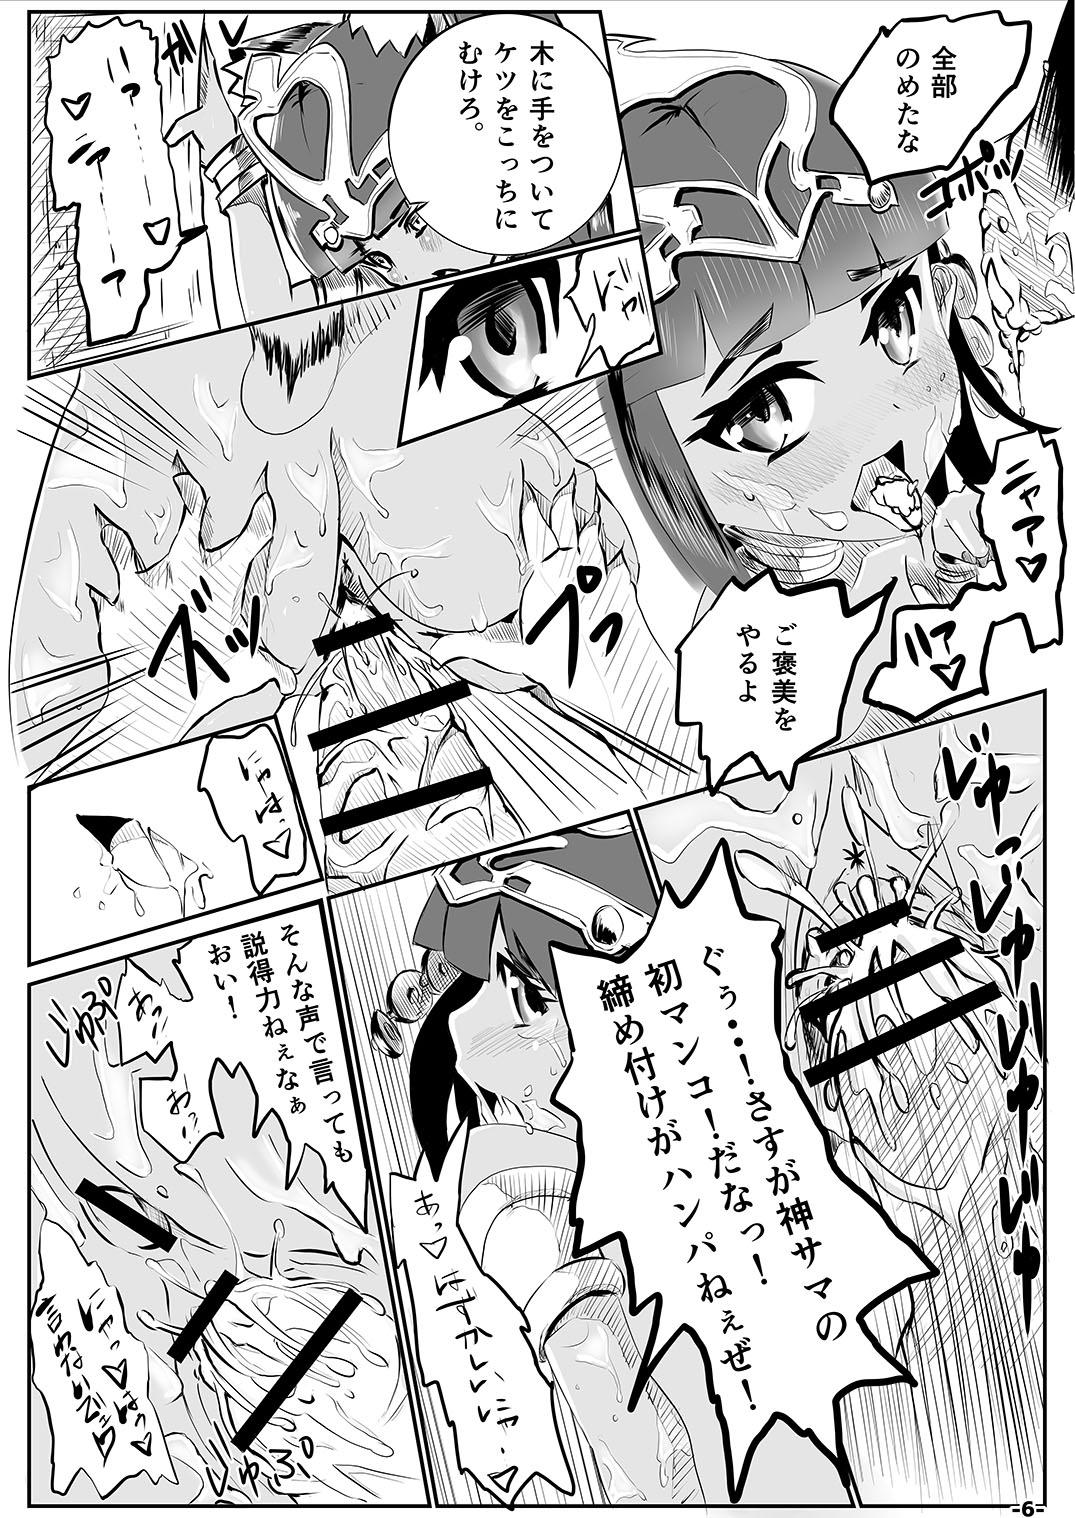 Chichona Yamiochi 2nd - Puzzle and dragons Whores - Page 5